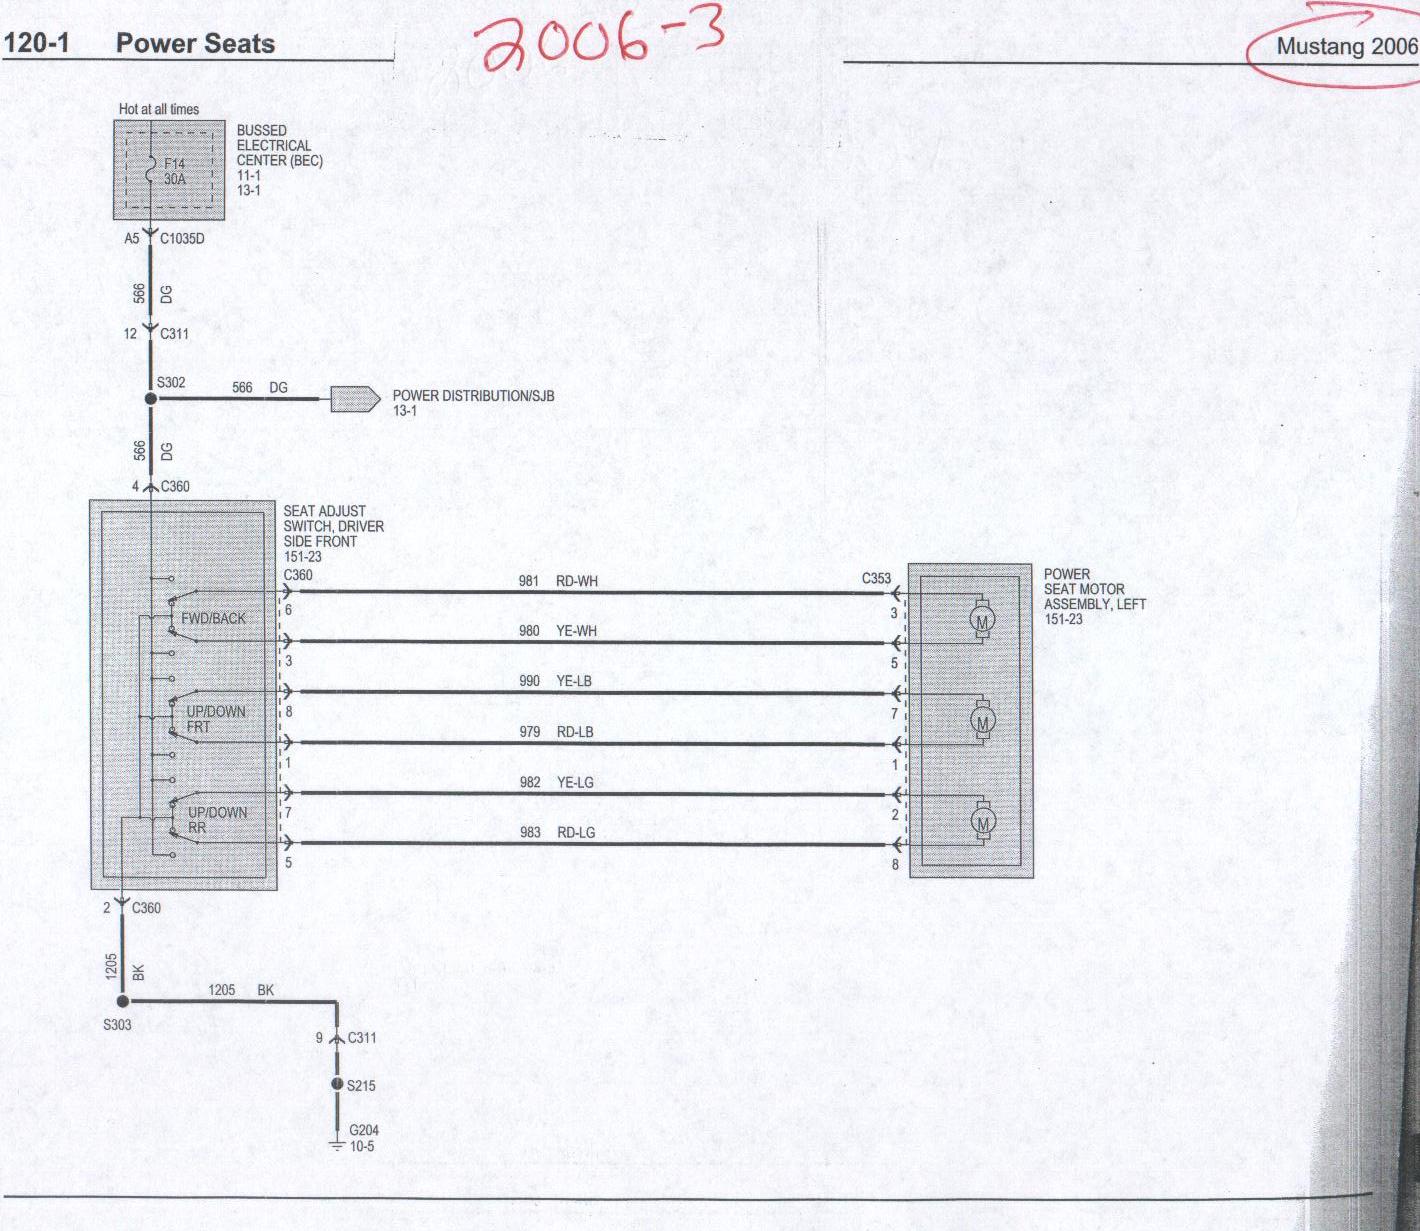 Power Seat Wiring Diagram from themustangsource.com